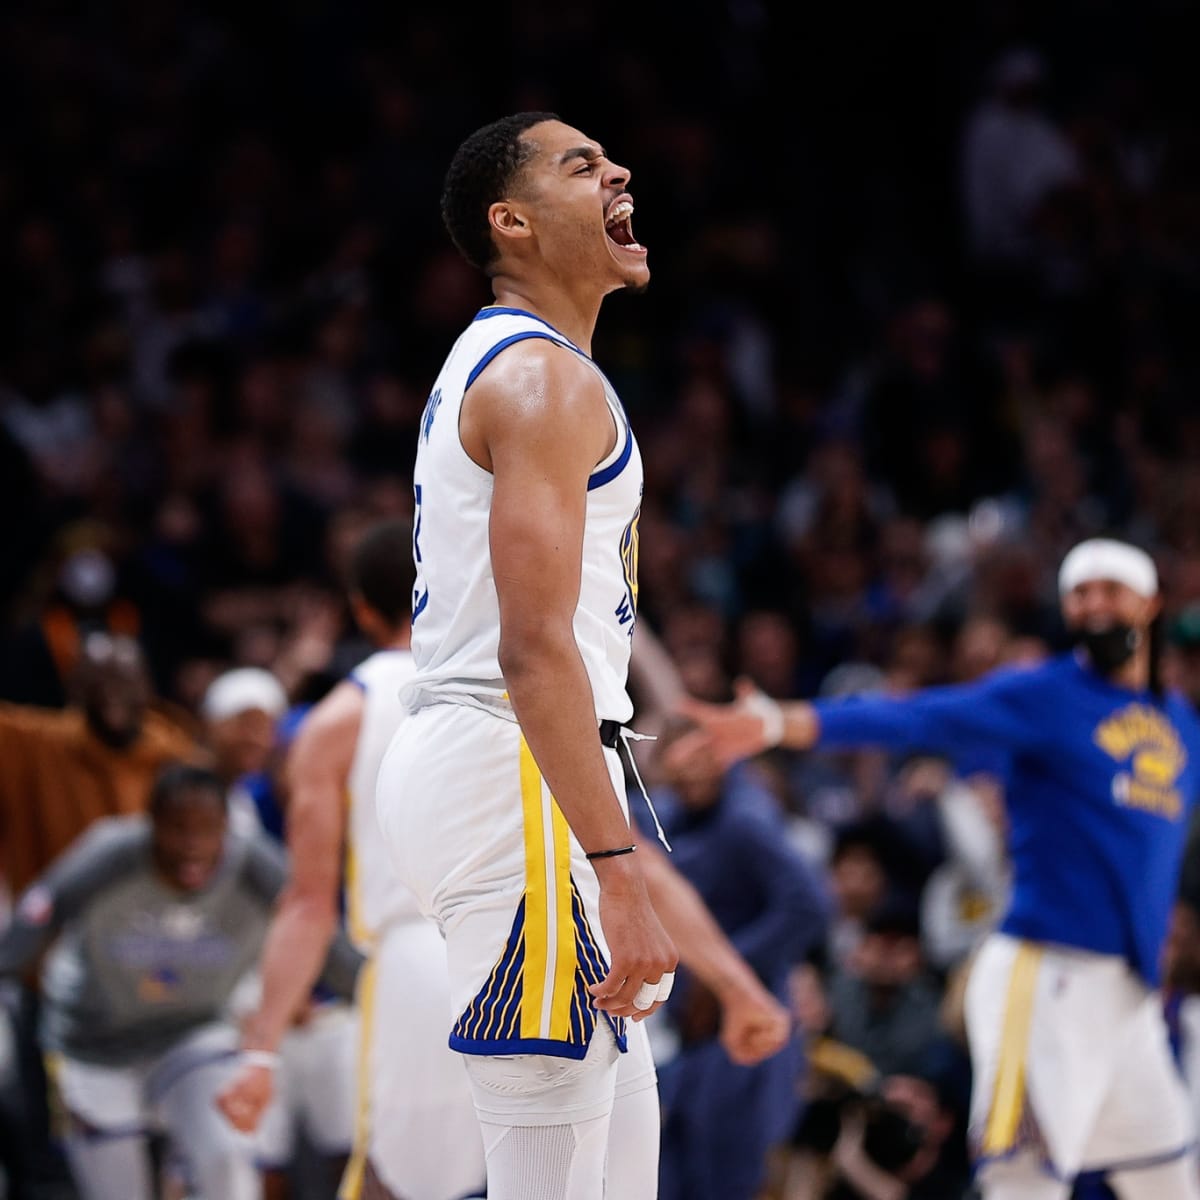 PTSD' and the Warriors' Jordan Poole conundrum: Golden State must